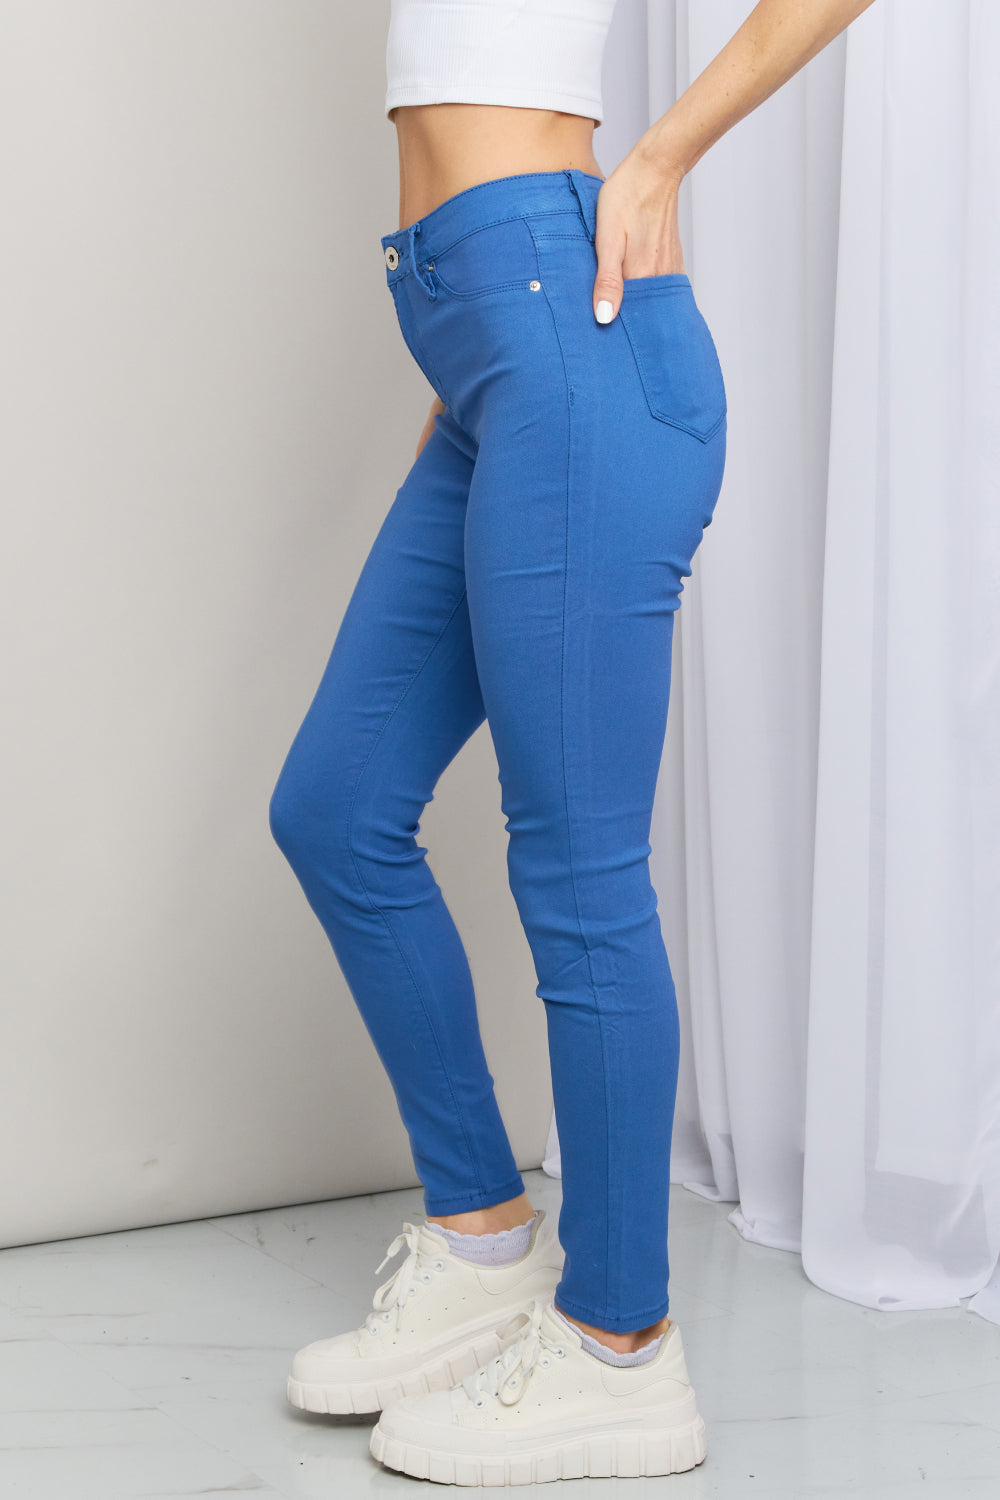 YMI Jeanswear Kate Hyper-Stretch Full Size Mid-Rise Skinny Jeans in Electric Blue